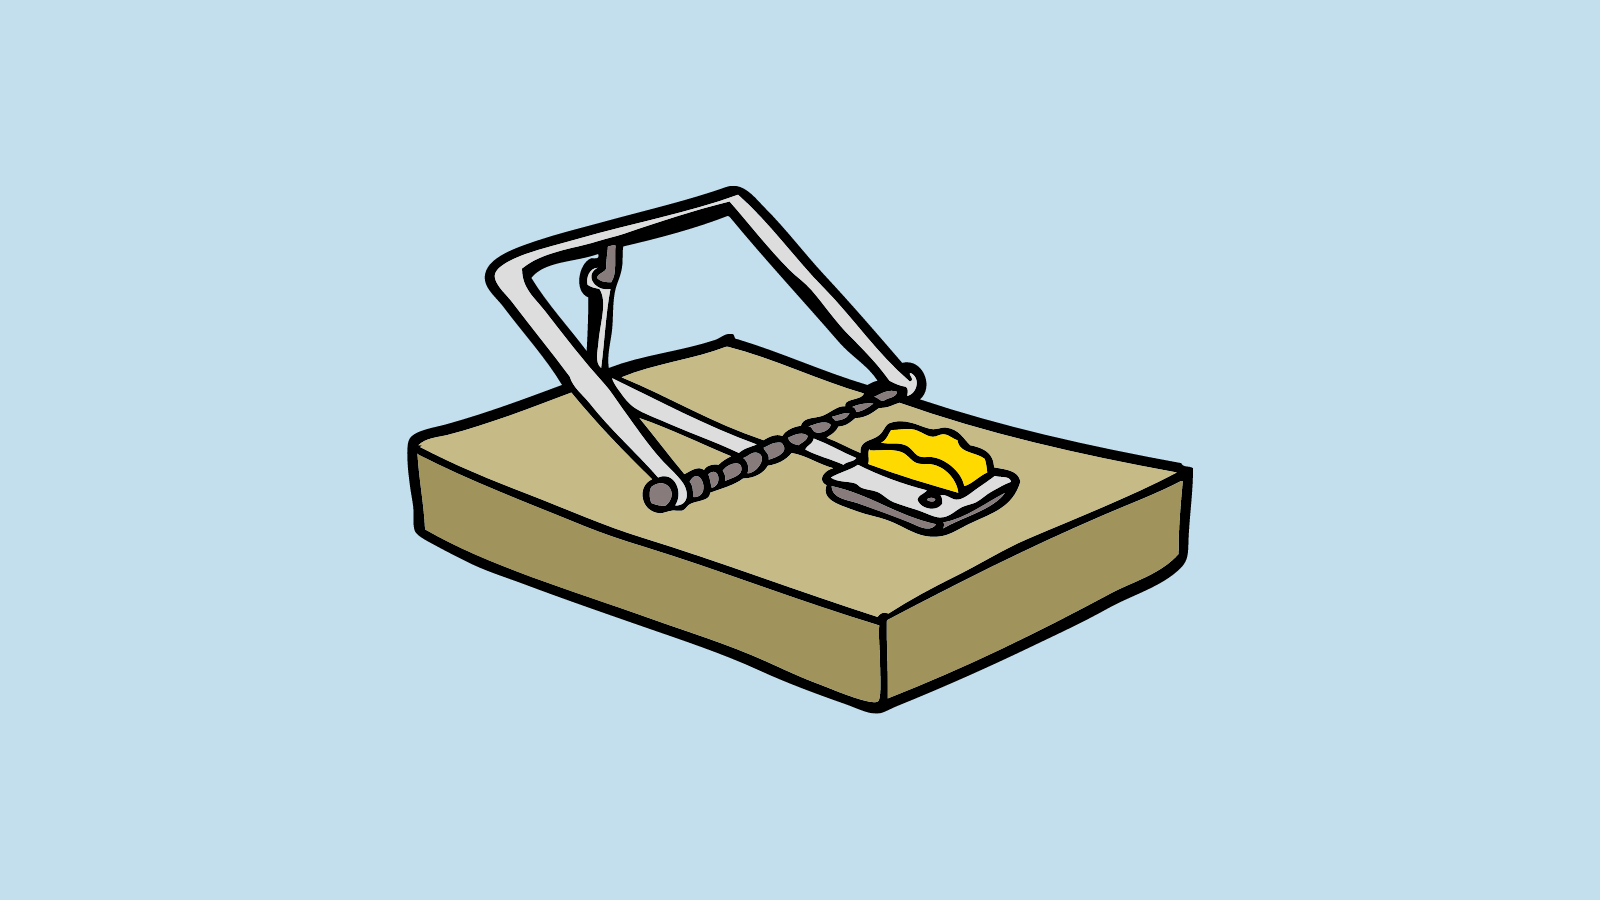 A mouse trap with cheese as the bait